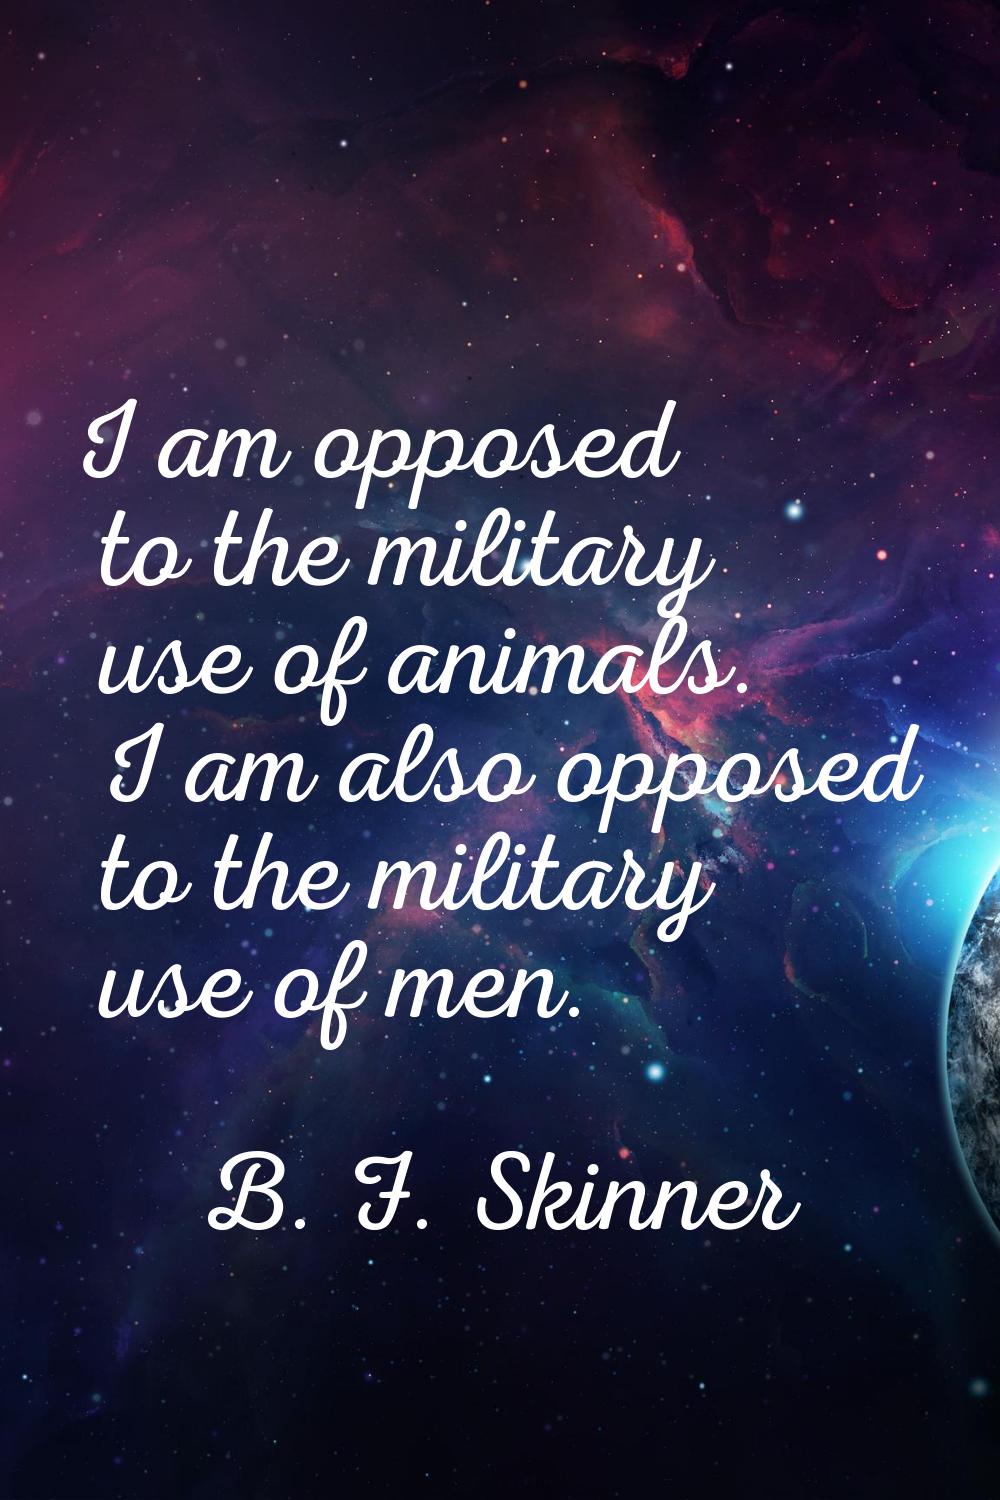 I am opposed to the military use of animals. I am also opposed to the military use of men.